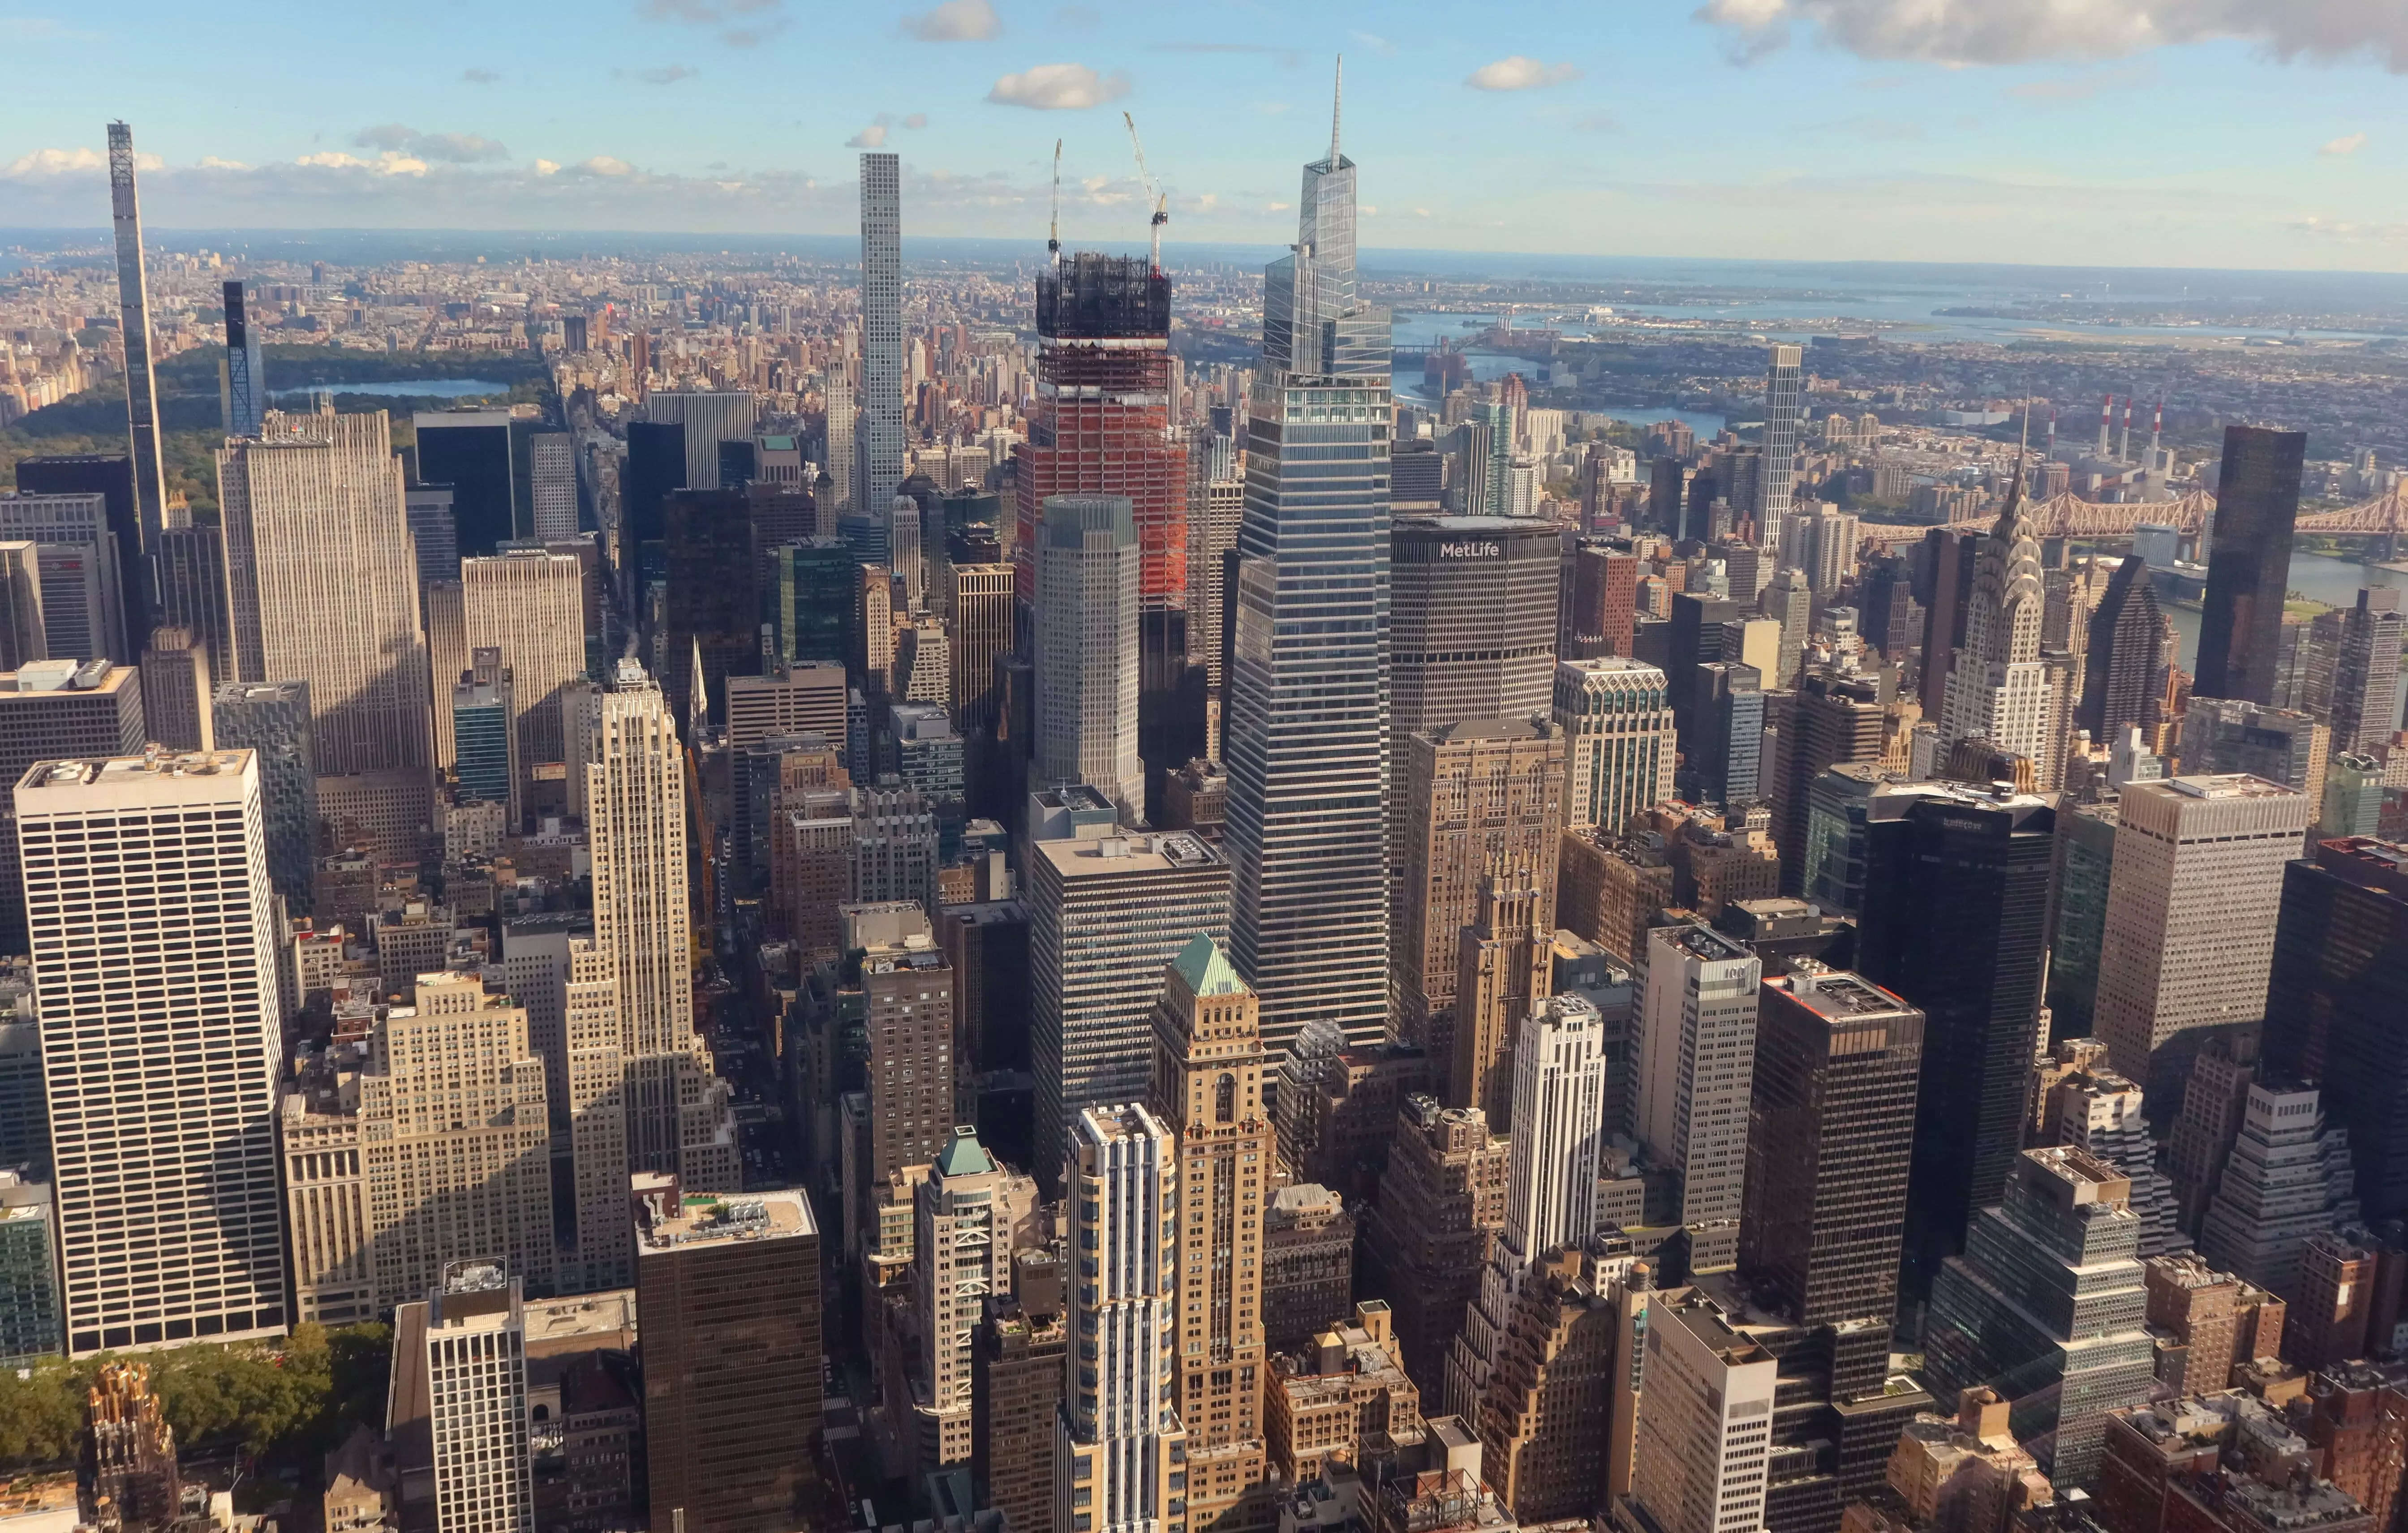 The 25 Year Office Construction Boom That Transformed New York Citys Skyline Has Hit The Brakes